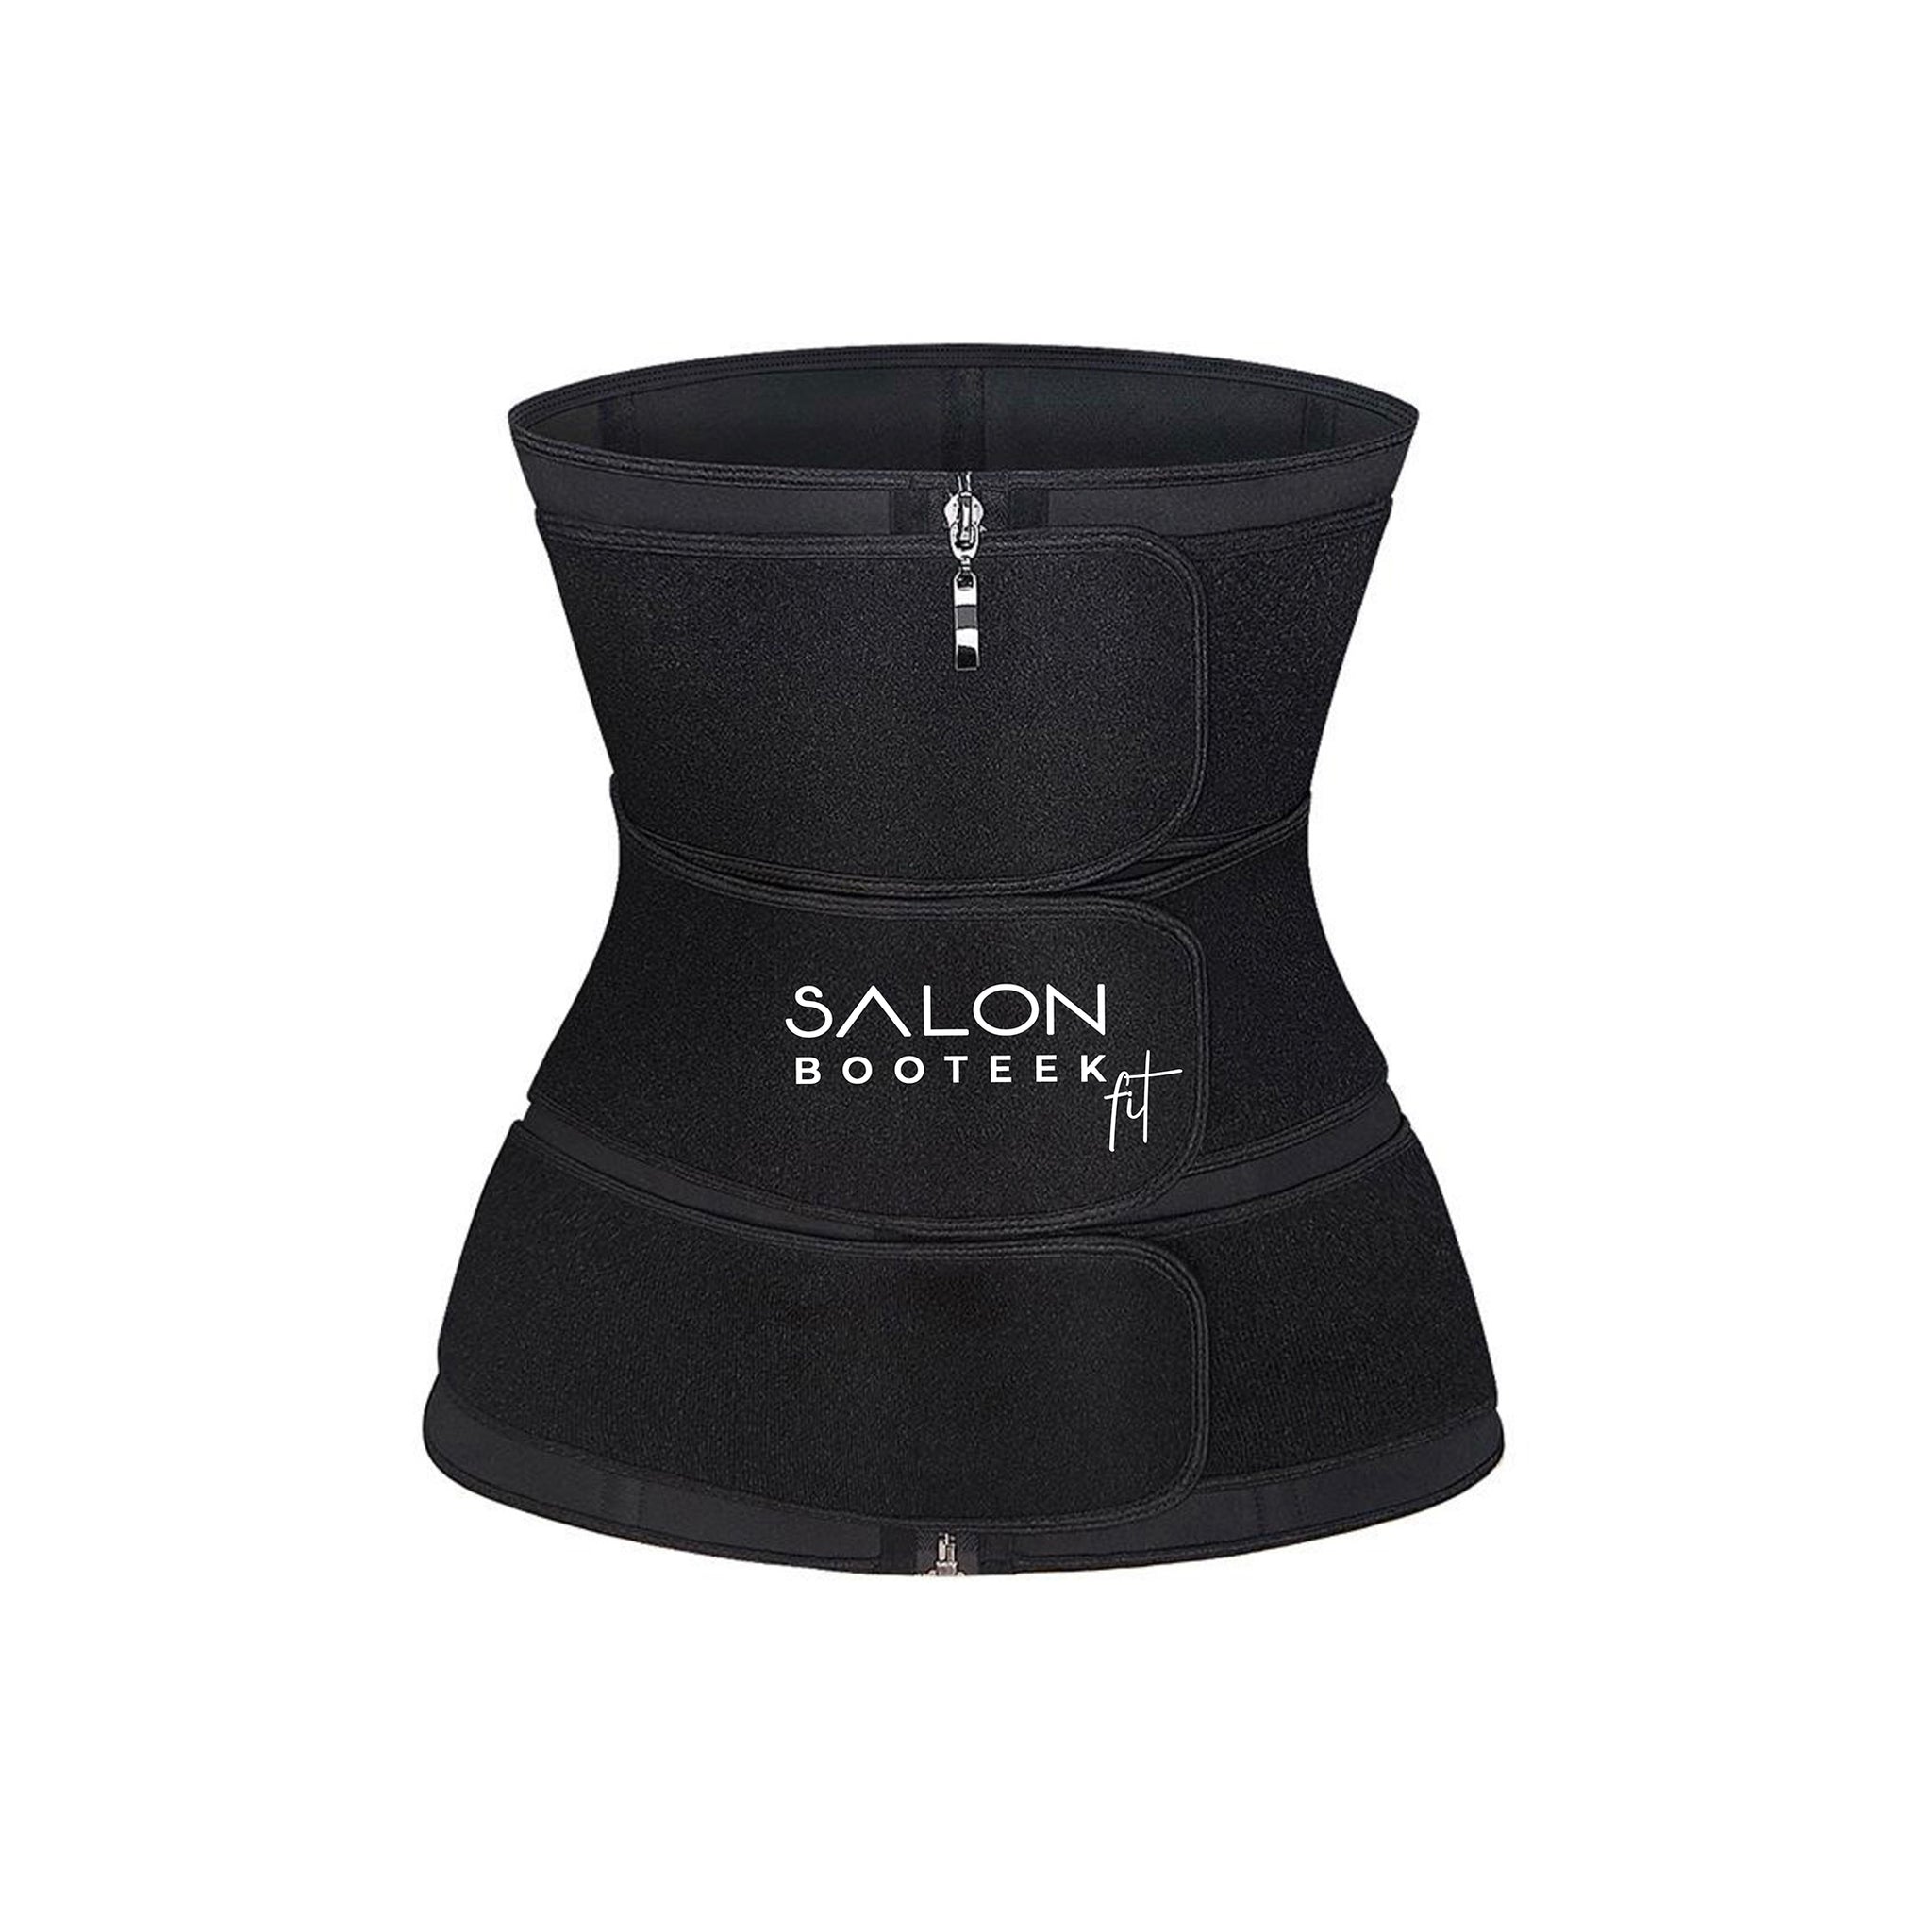 Fupa Be Gone Waist Trainer For Women Full Body Plus Size, Fupa Cont